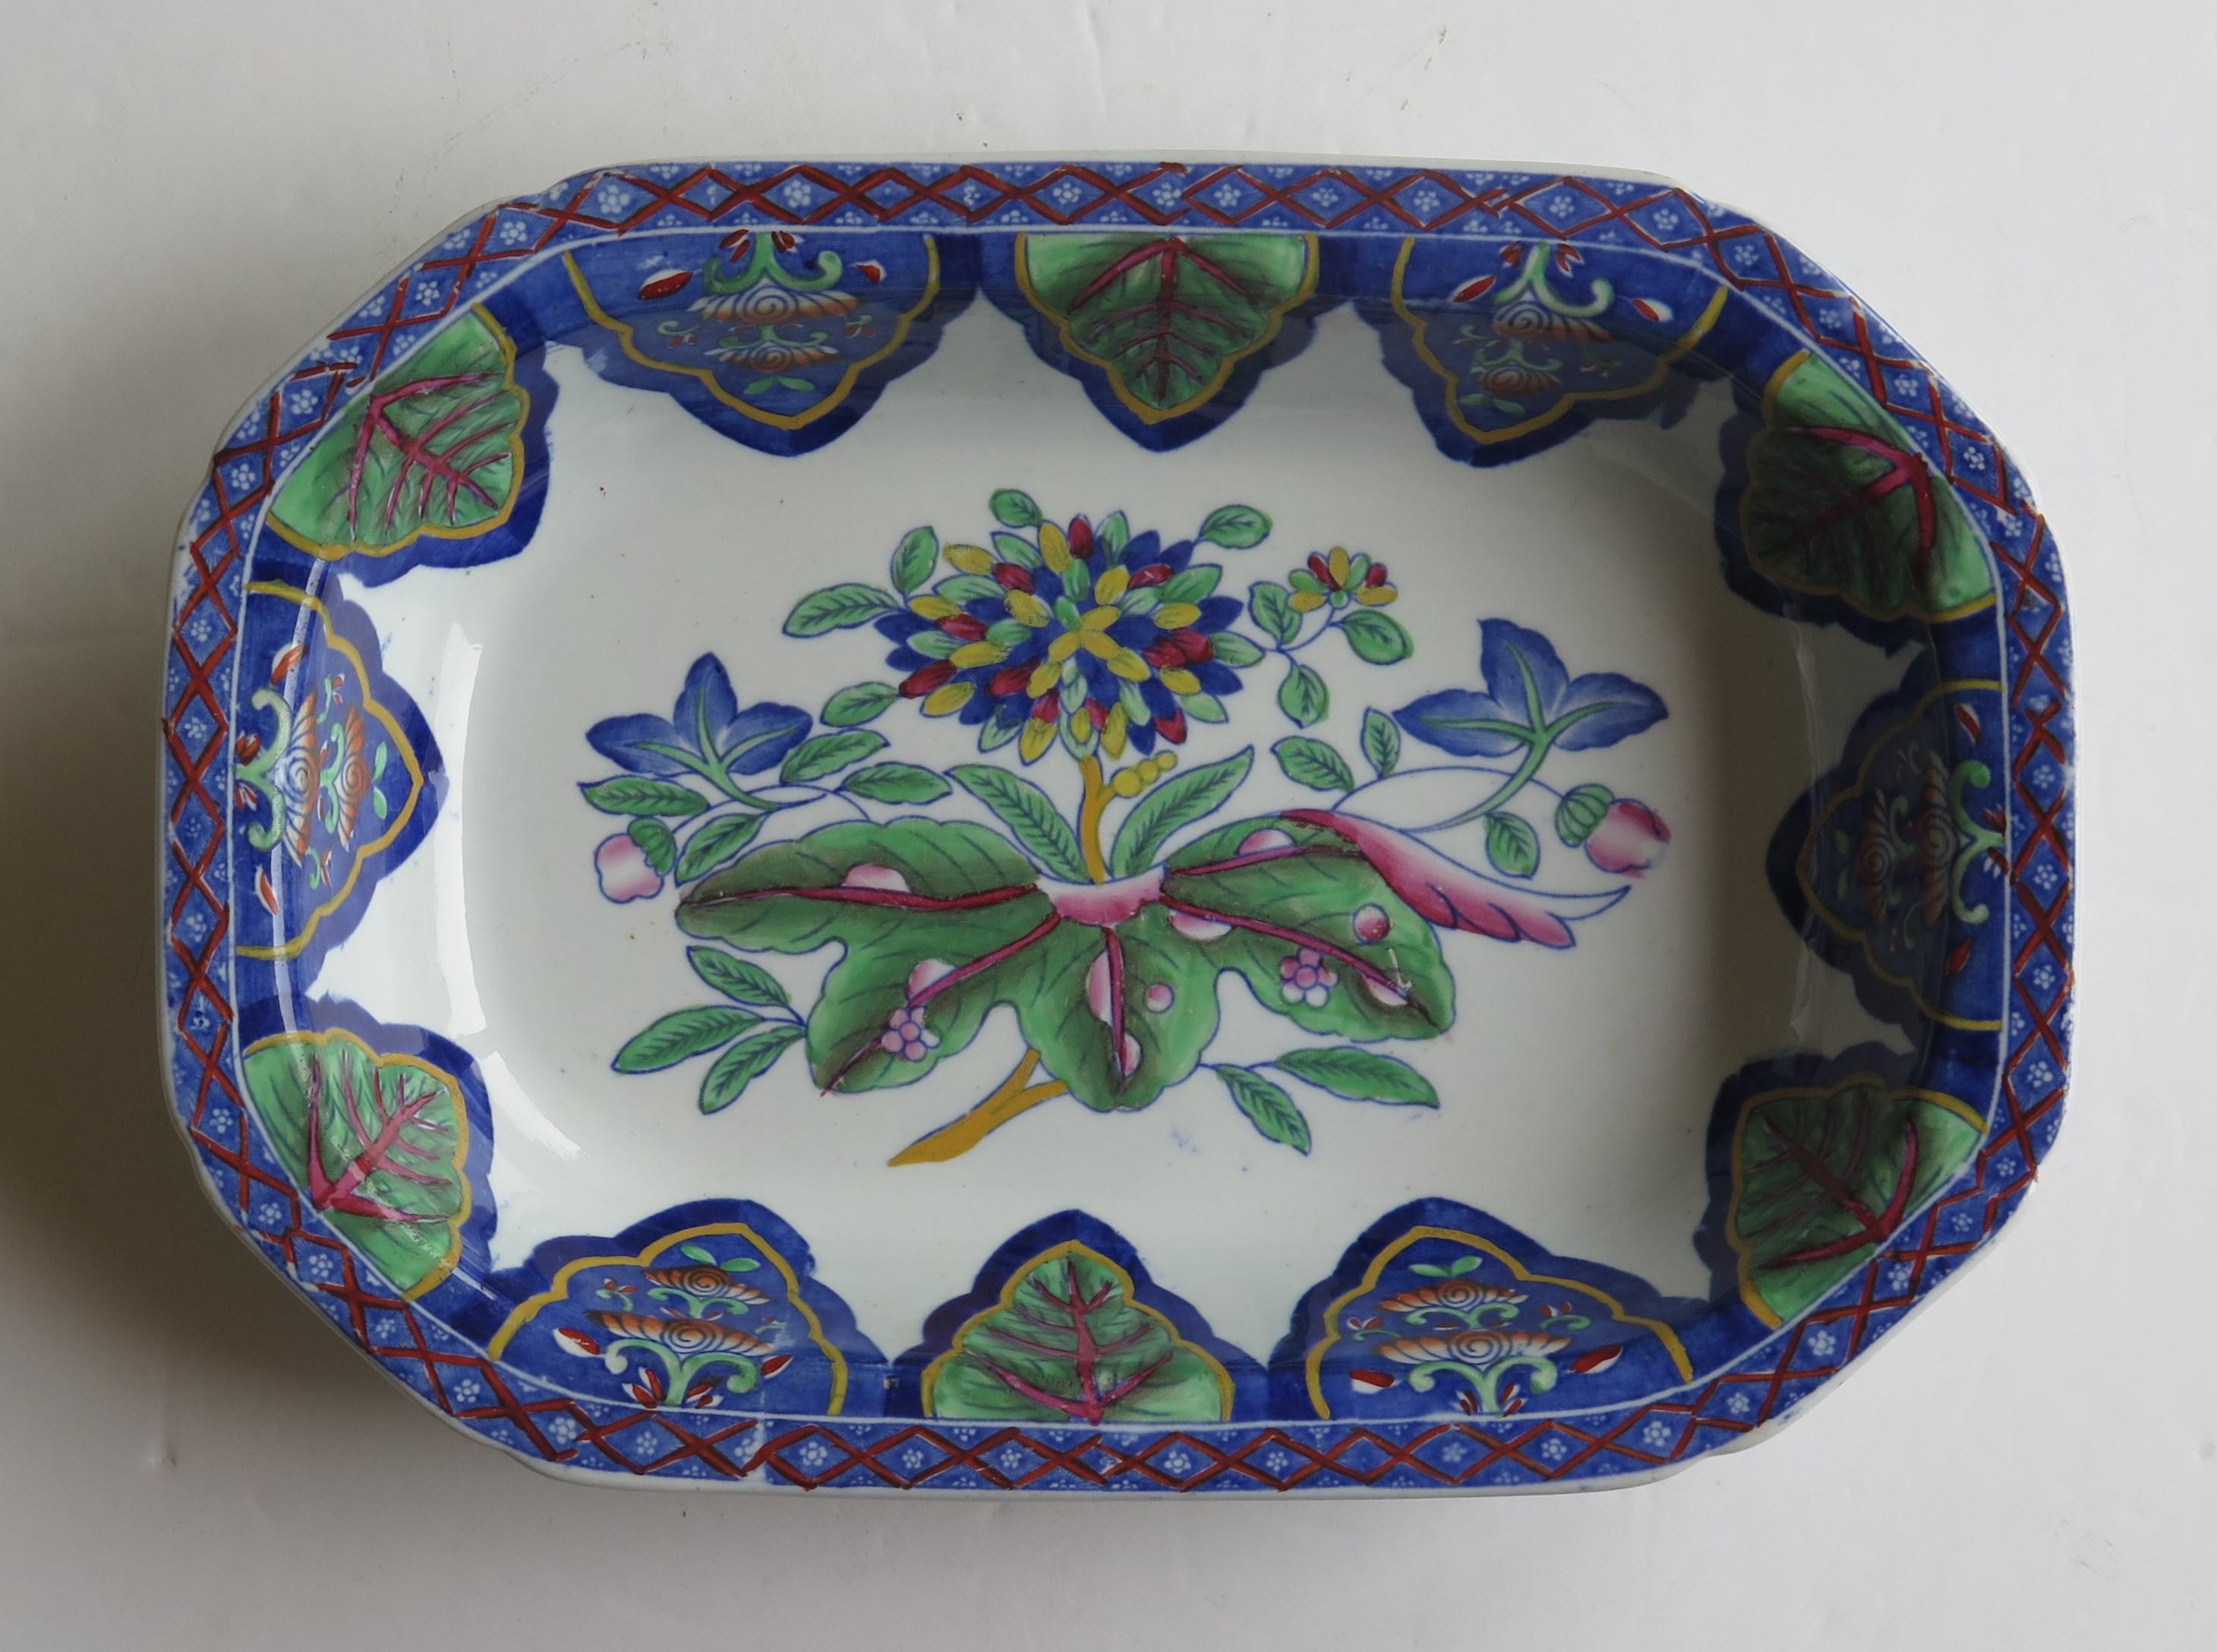 This is a beautiful Ironstone pottery deep serving dish made by Copeland & Garrett / Spode, hand enamelled in the Radiating Leaves Pattern No 3876, produced in the first half of the 19th Century, William 1Vth period, Circa 1835

The dish is well